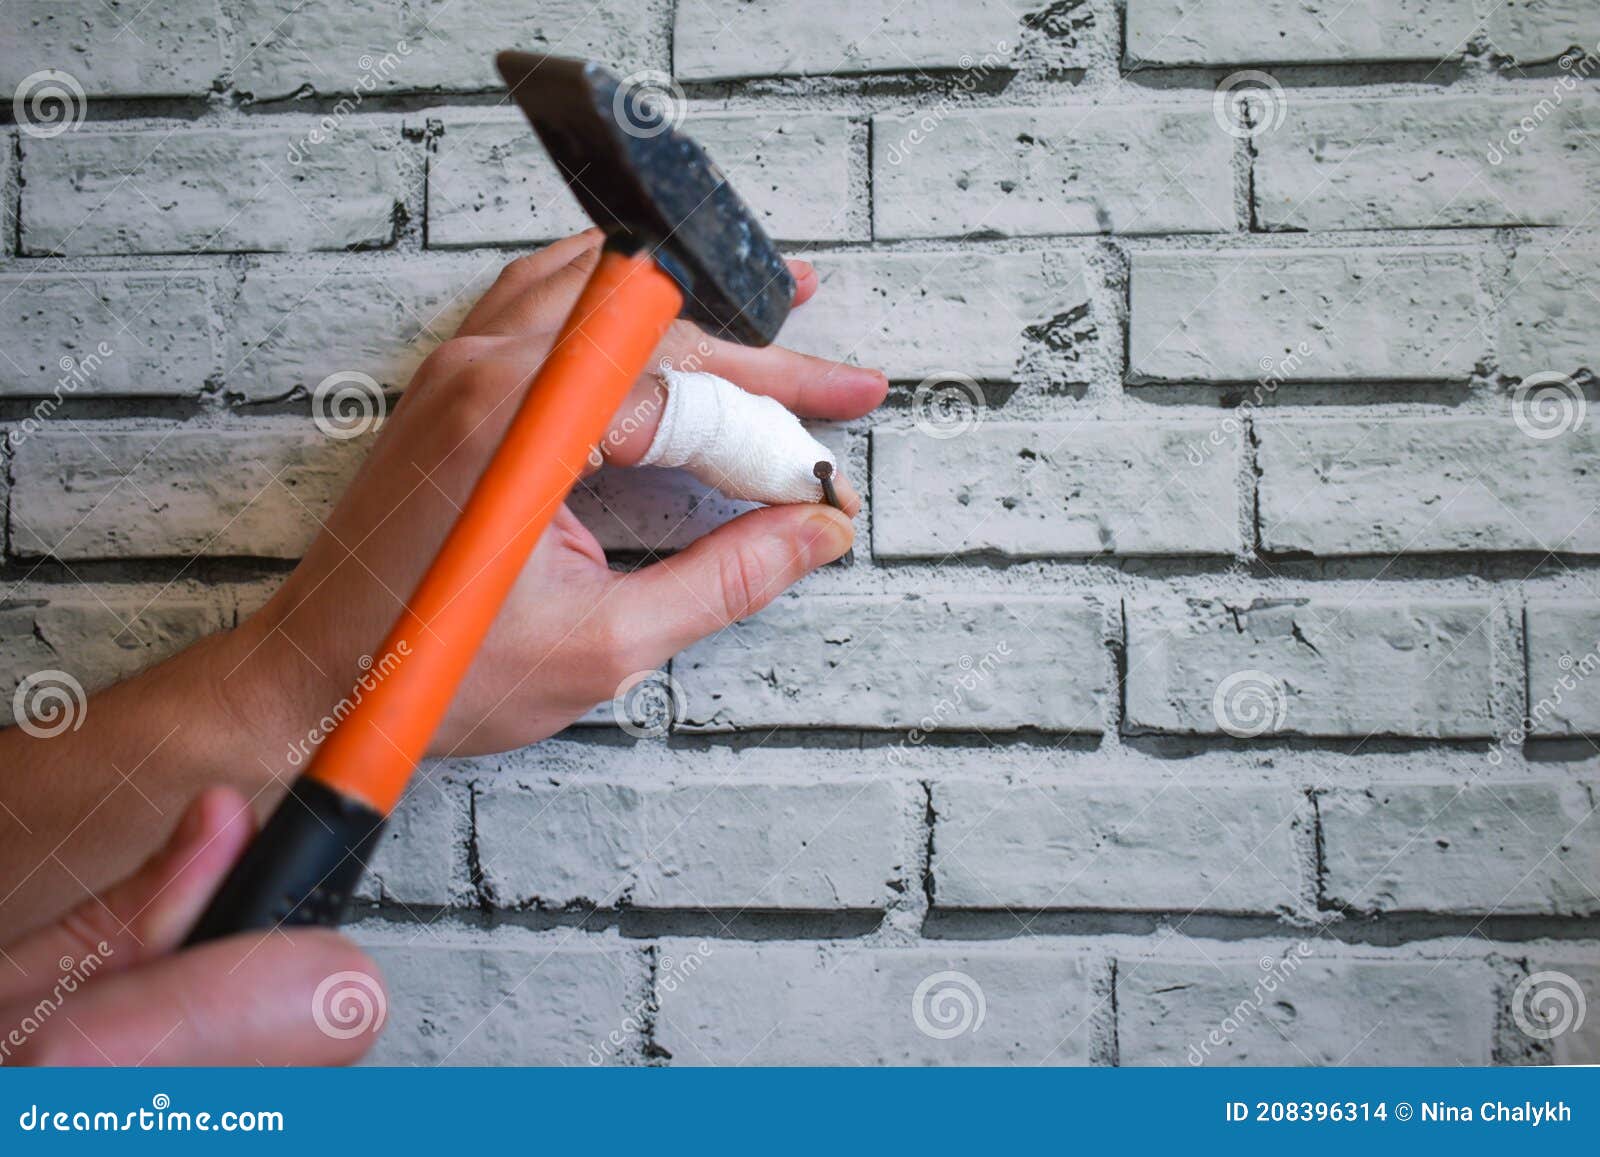 Hand with Bandaged Finger Drives Nail into the Wall, instead of Nail it  Hits Finger with Hammer. Man Drives Nail into Wall Stock Photo - Image of  finger, hand: 208396314